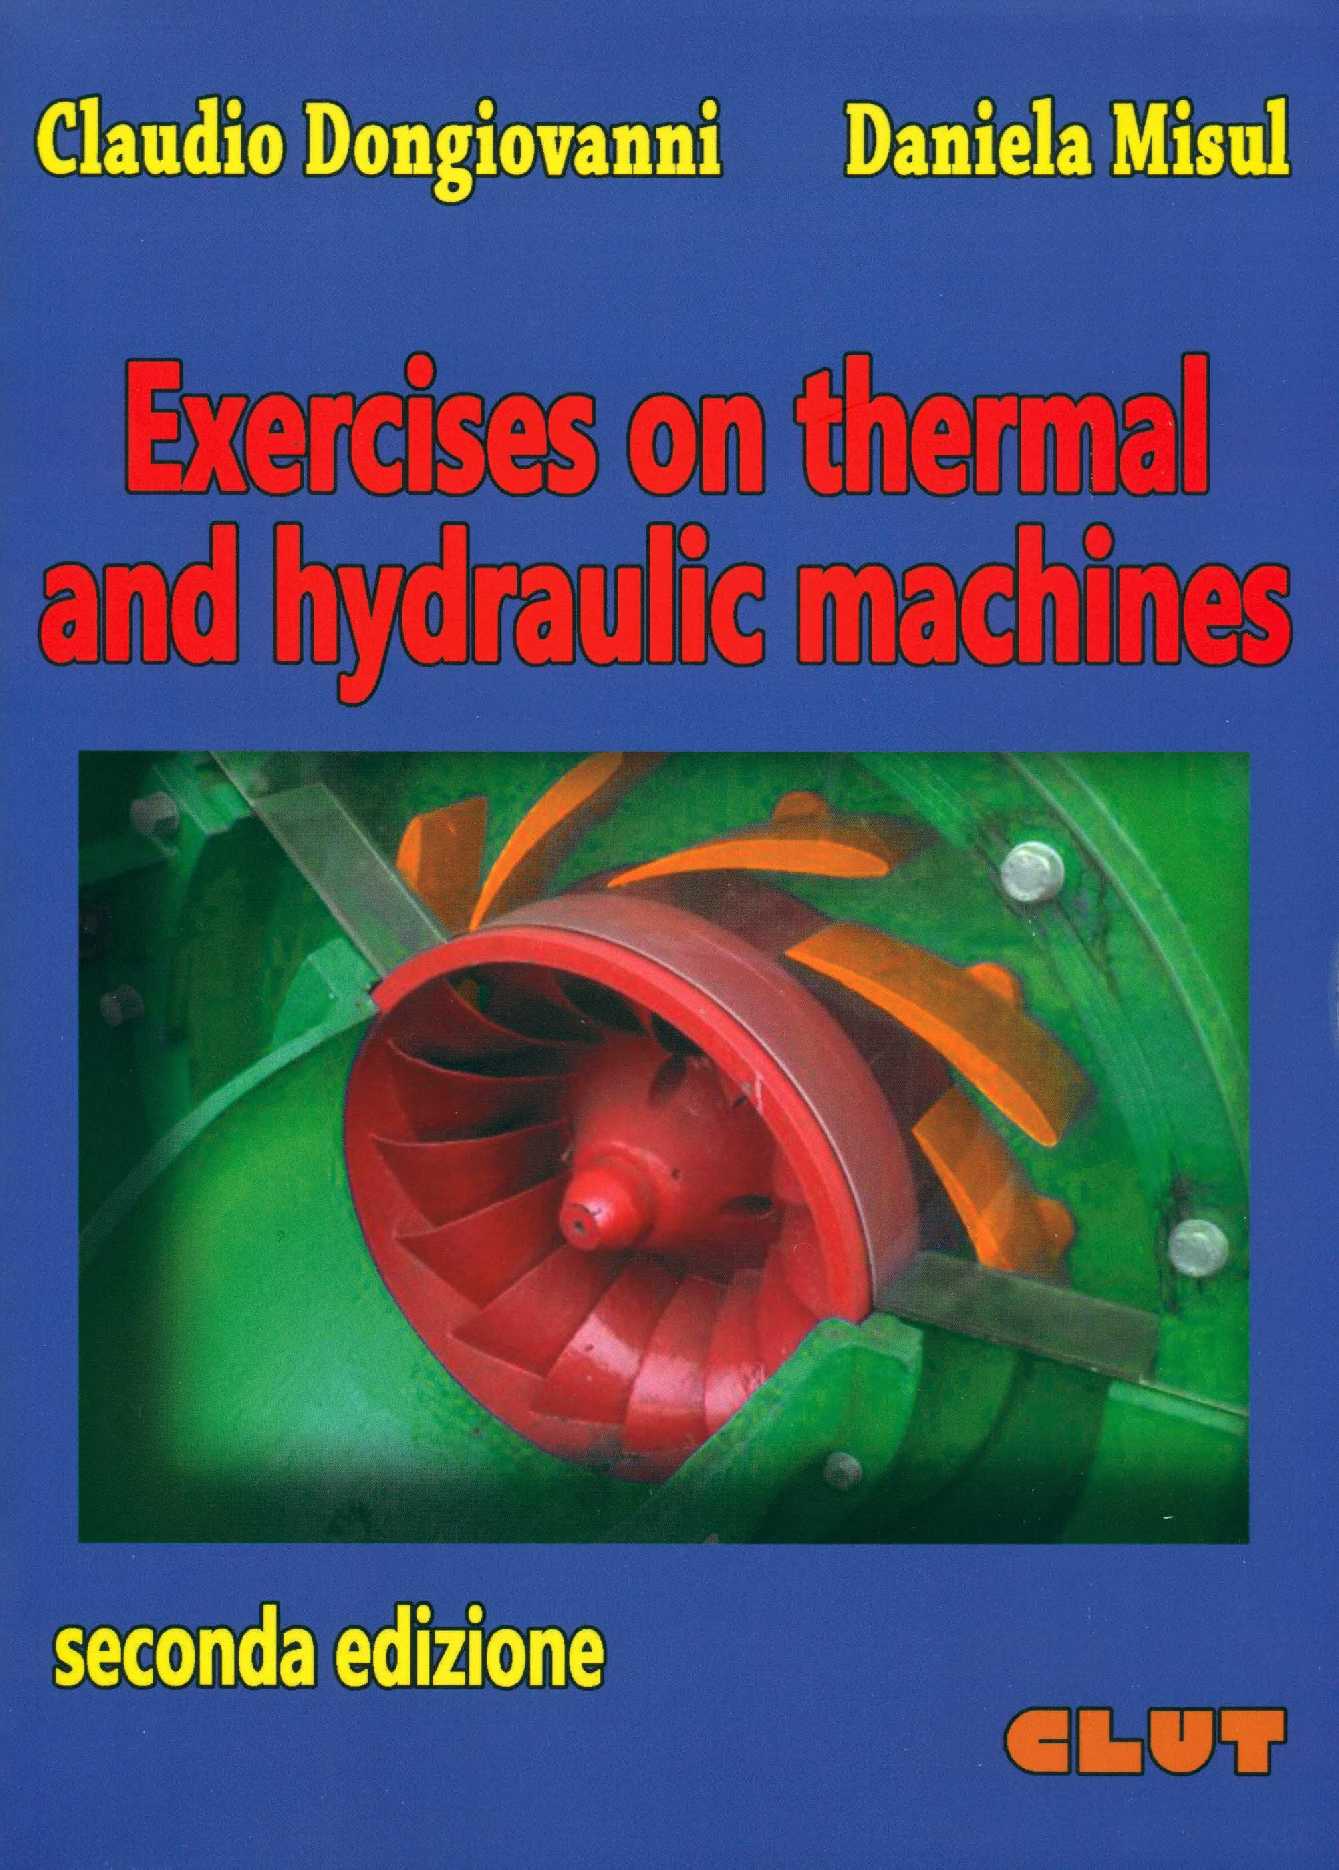 EXERCISES ON THERMAL AND HYDRAULIC MACHINES - II edizione